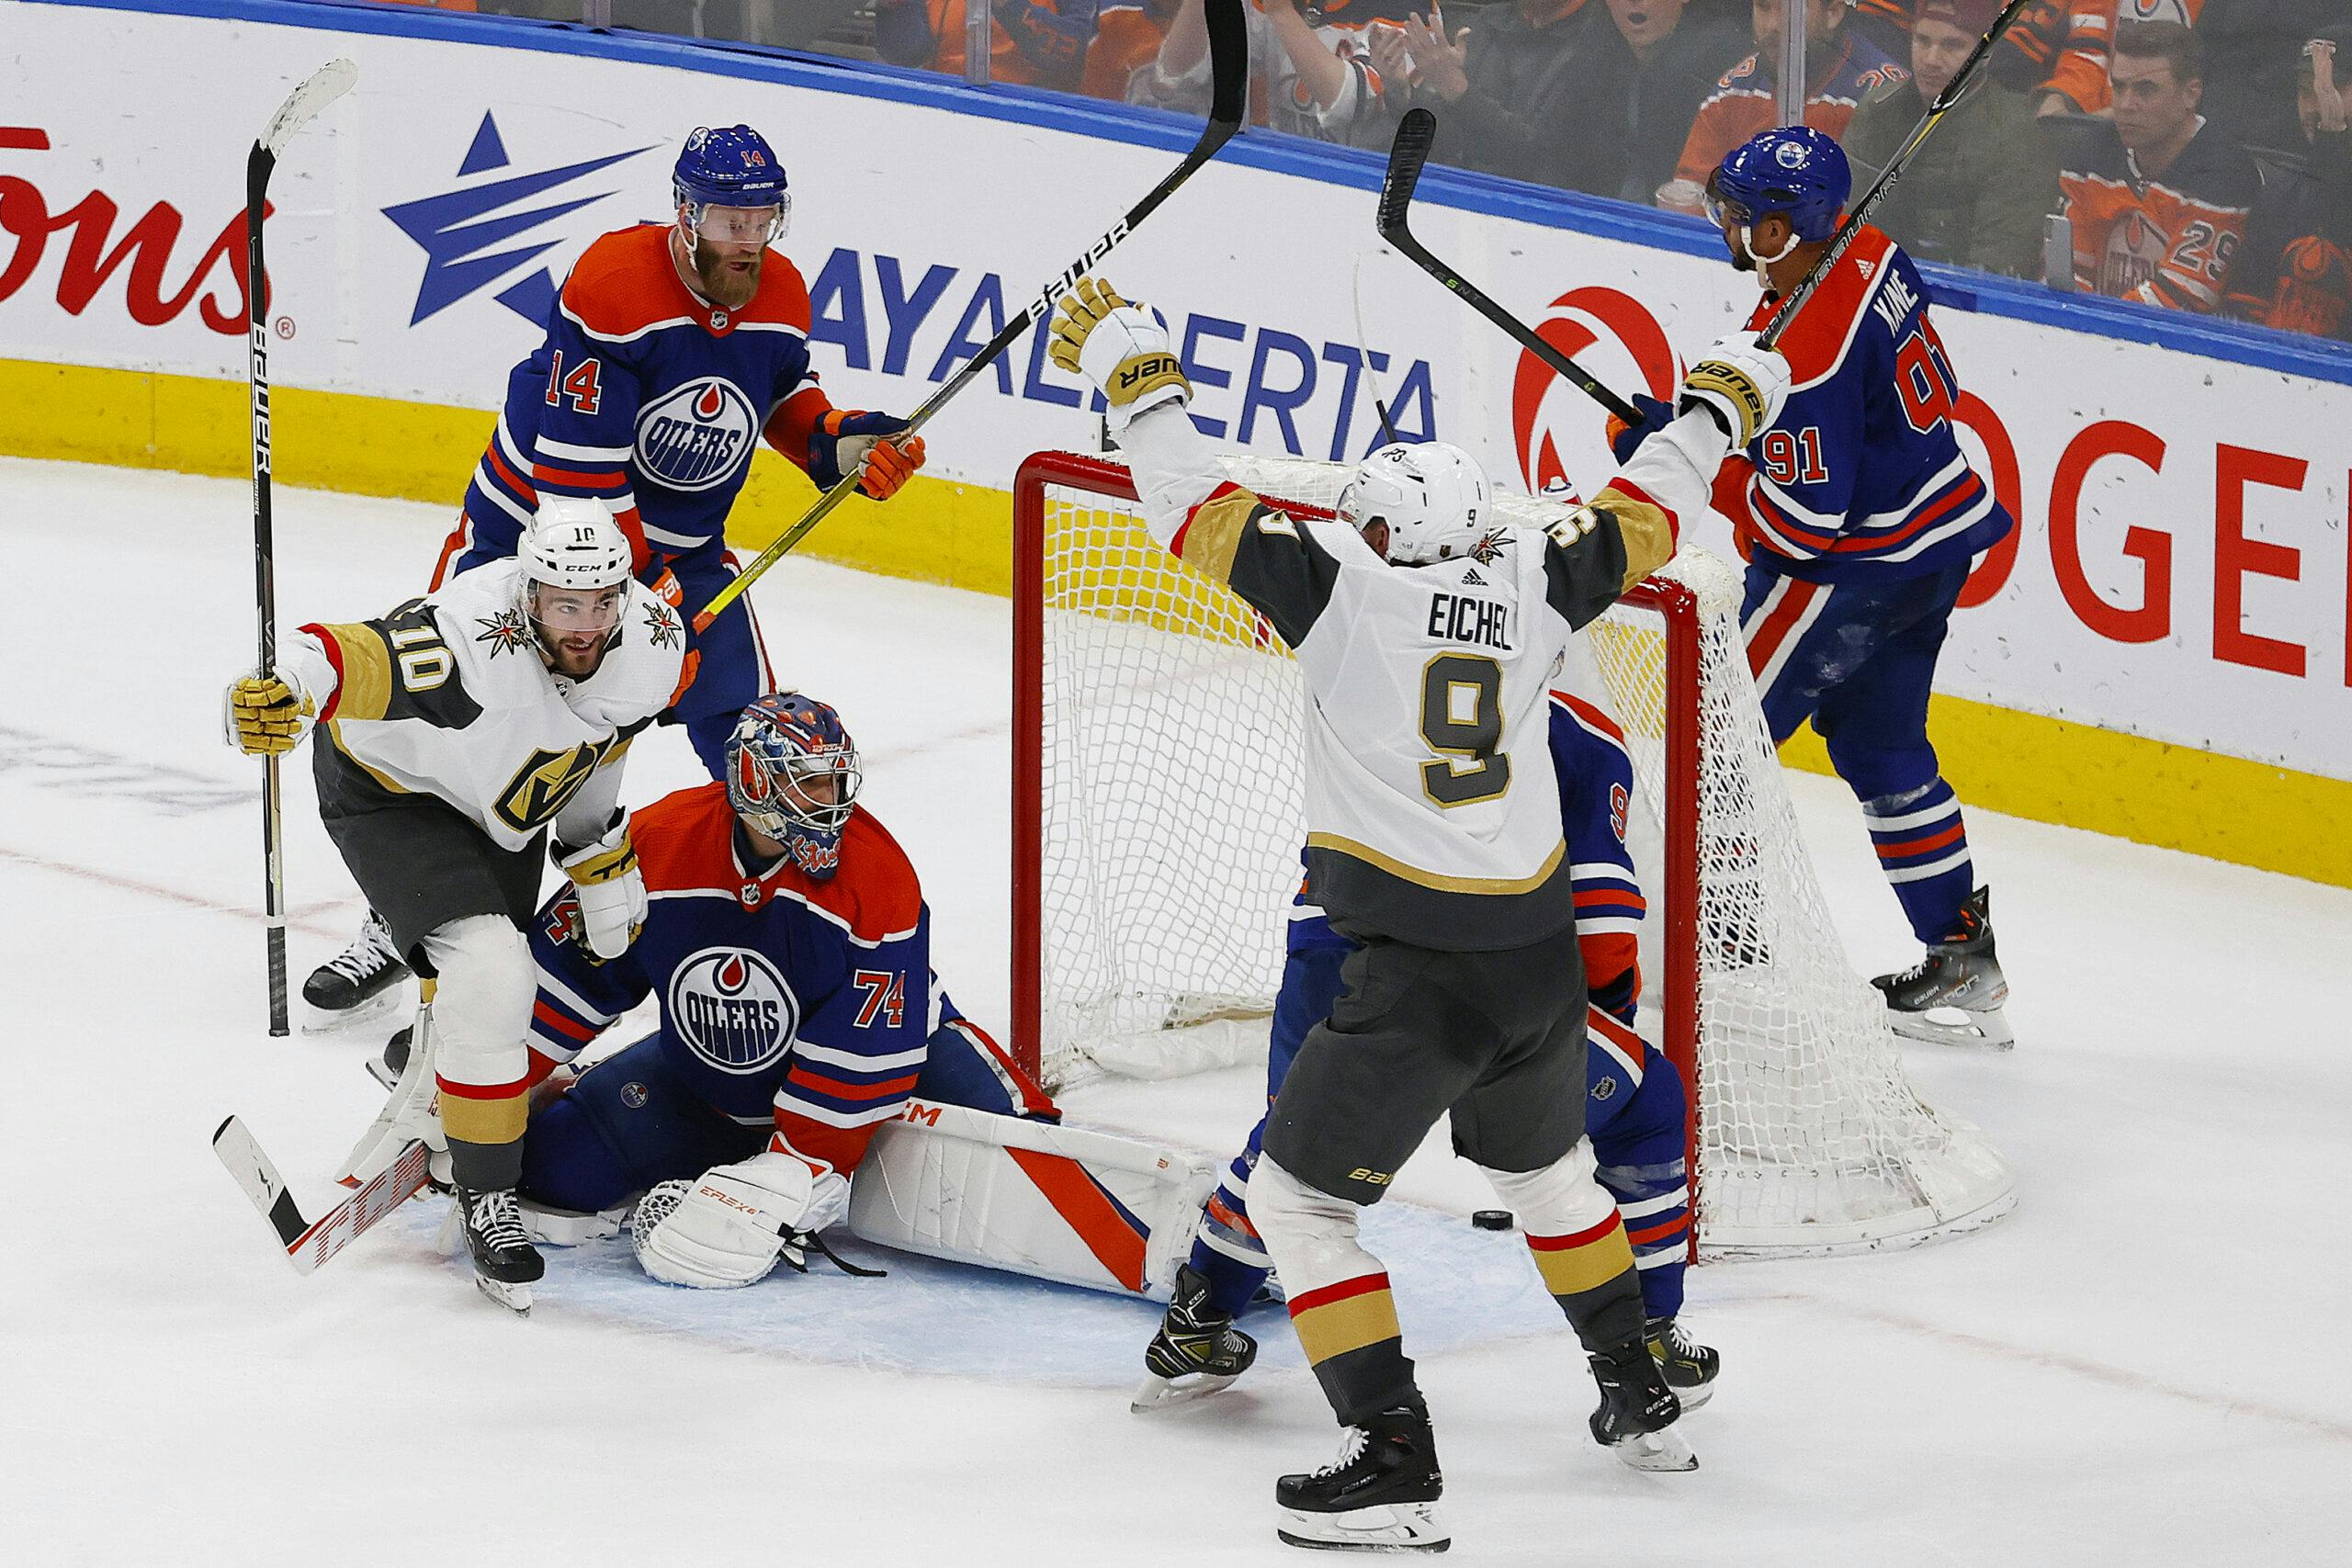 Draisaitl's 4 goals not enough for Oilers as Golden Knights take